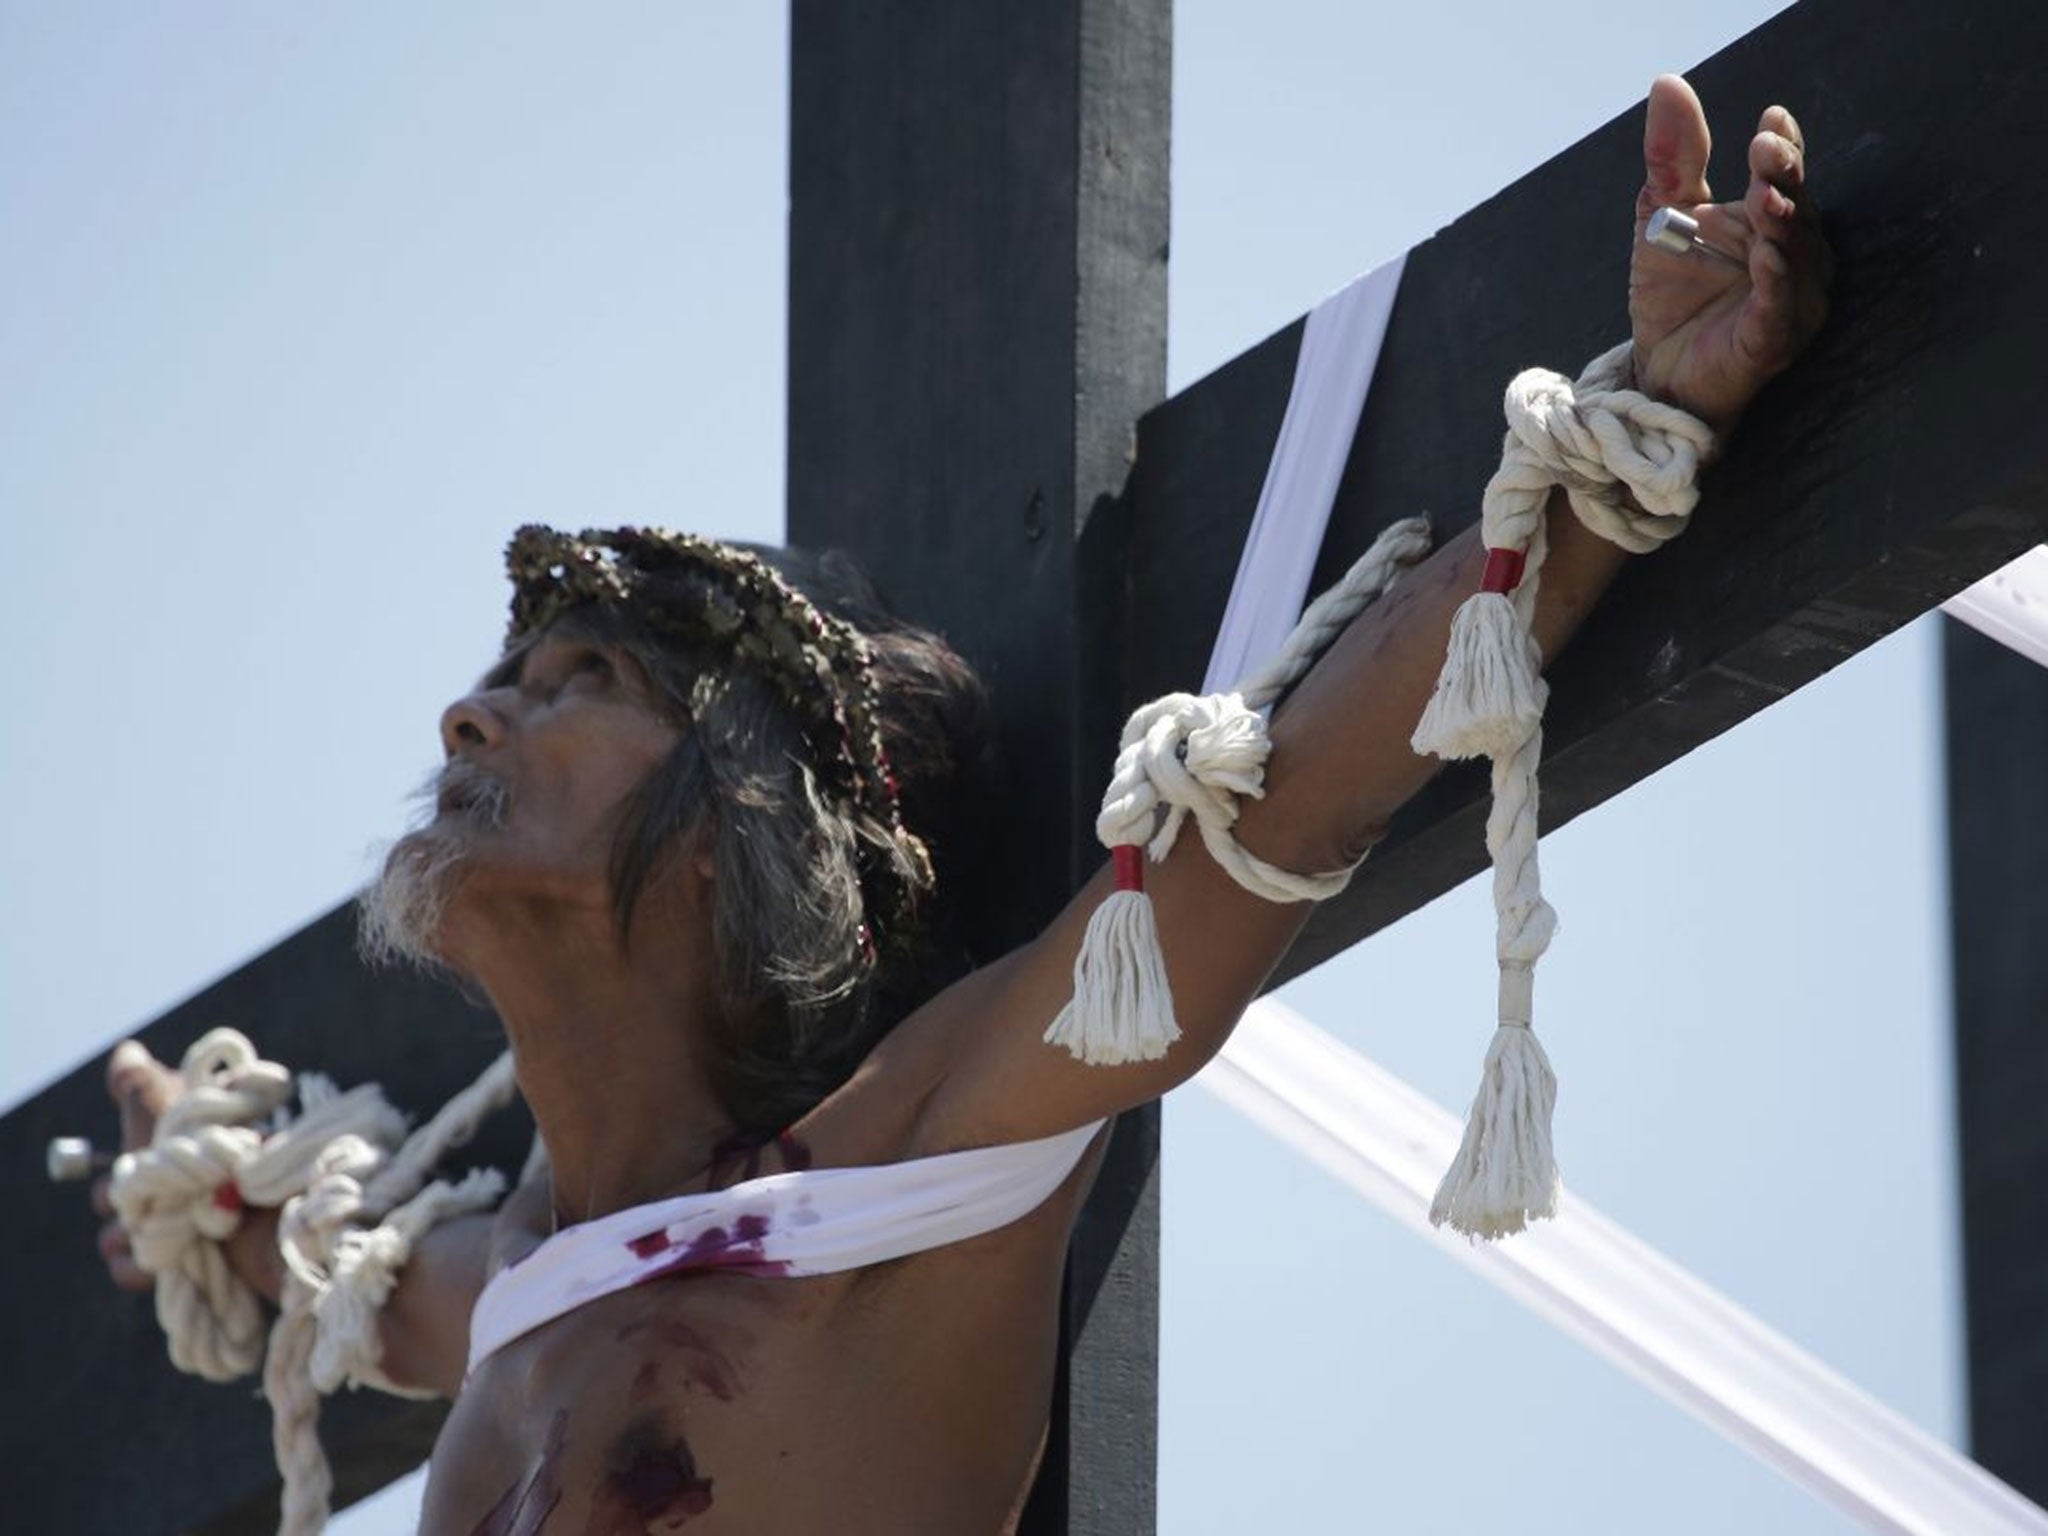 A Filipino penitent looks up as he is nailed to a wooden cross during Good Friday in Pampanga province, northern Philippines.